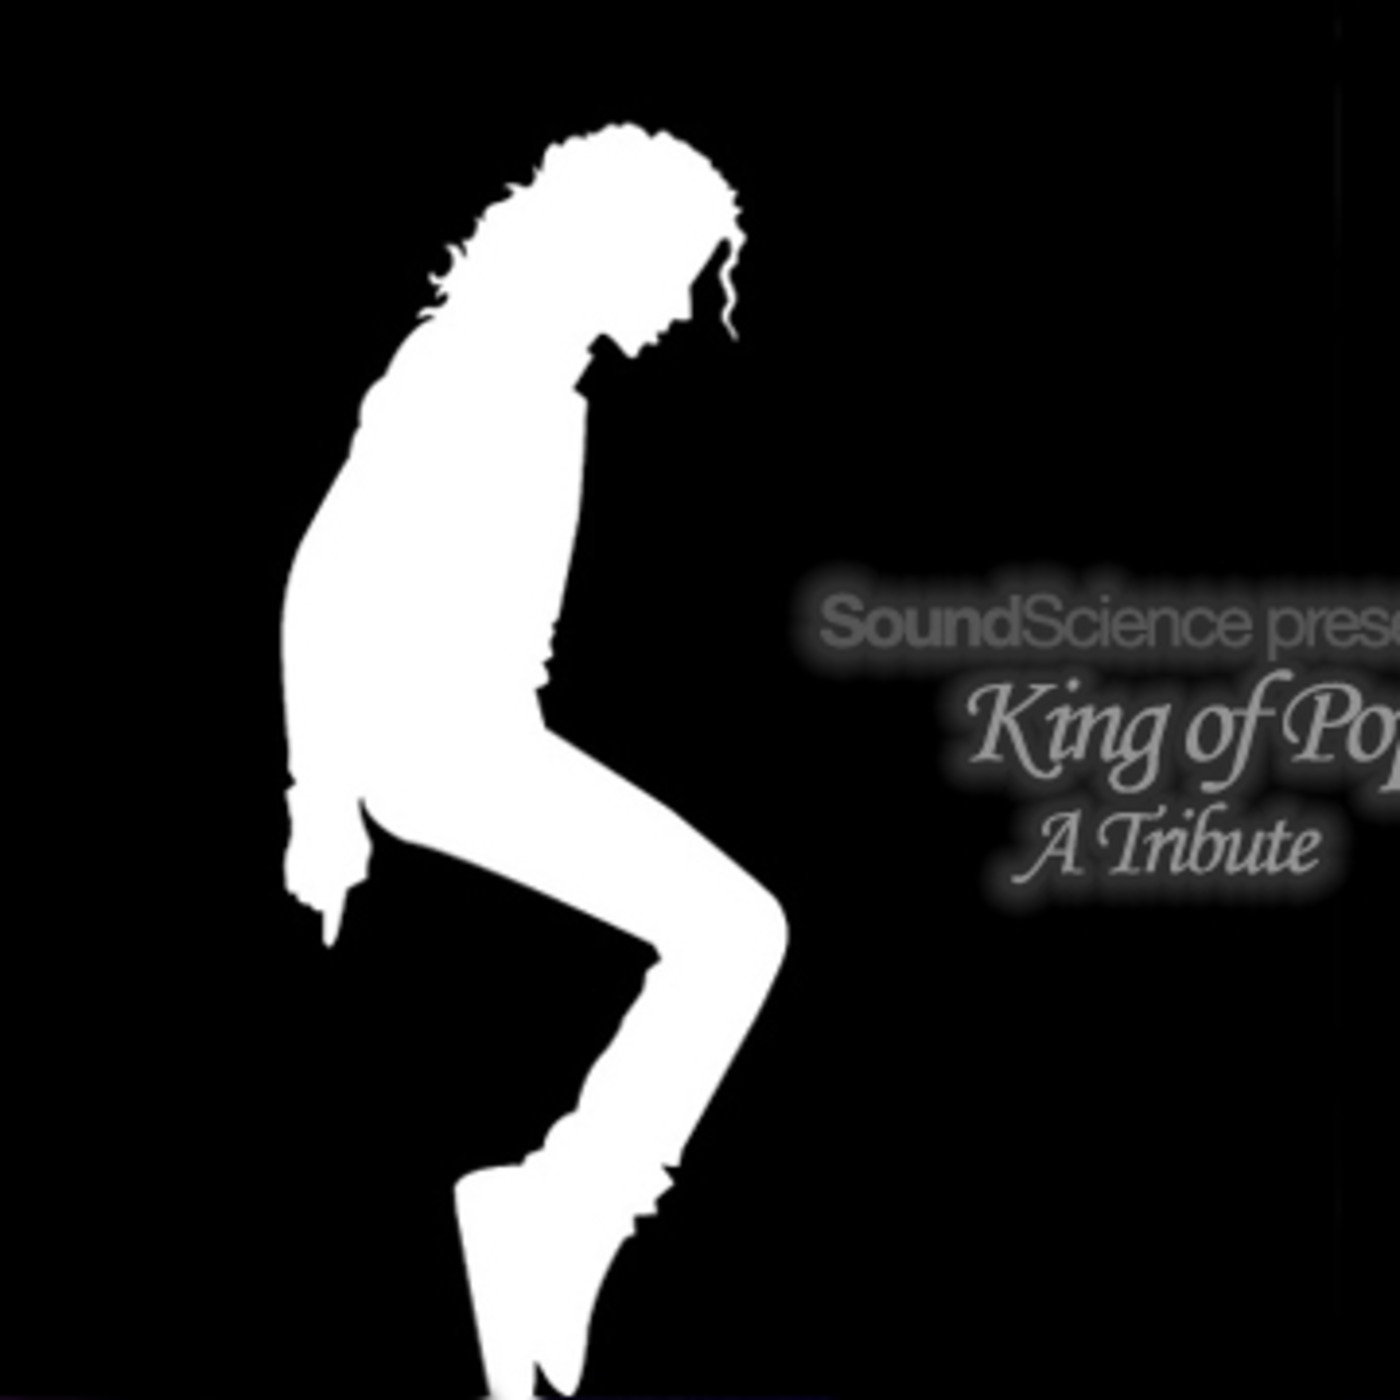 King of Pop:A Tribute